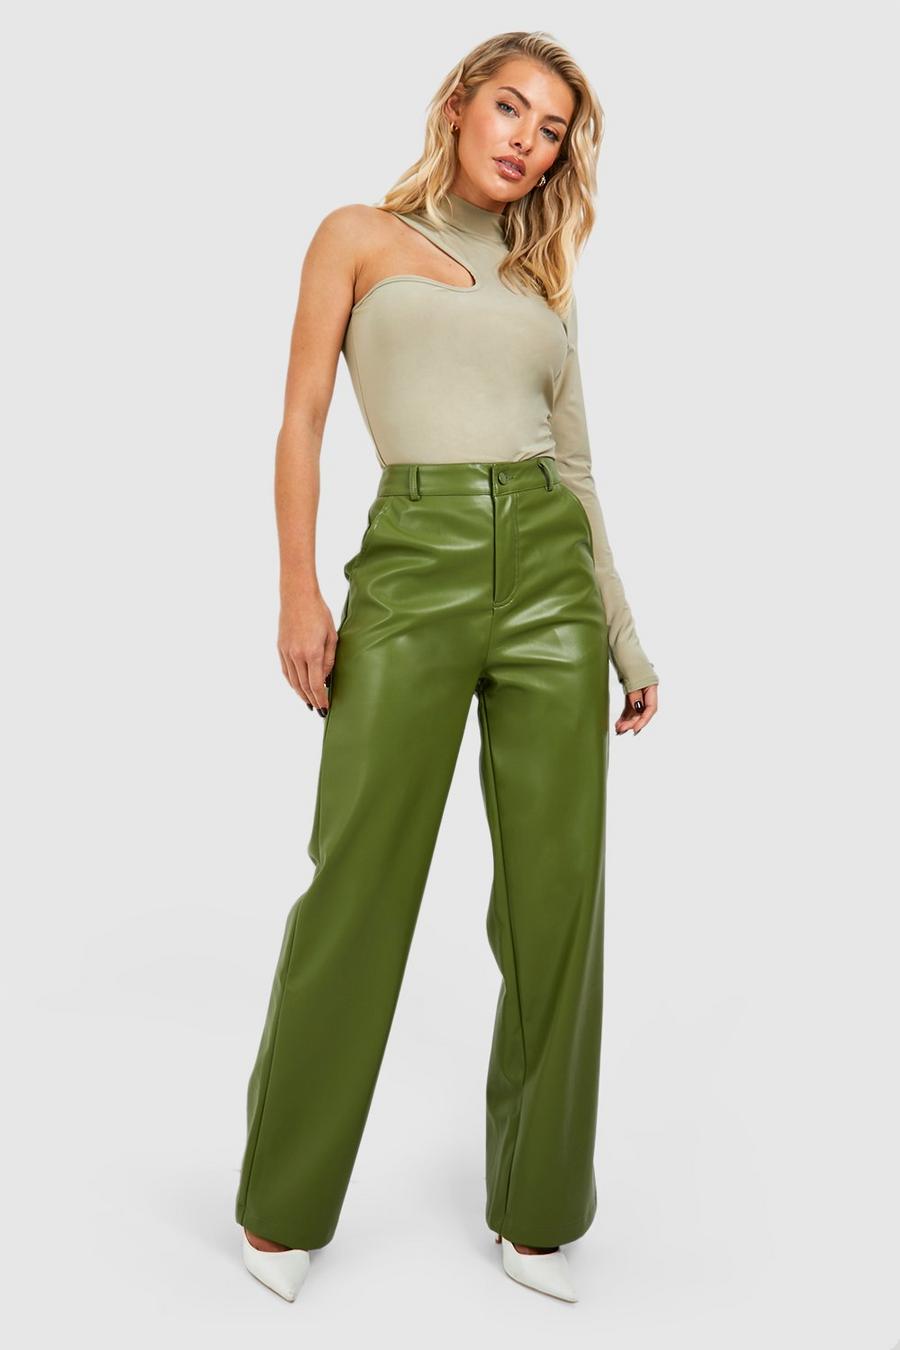 Khaki Leather Look Relaxed Fit Straight Leg Pants